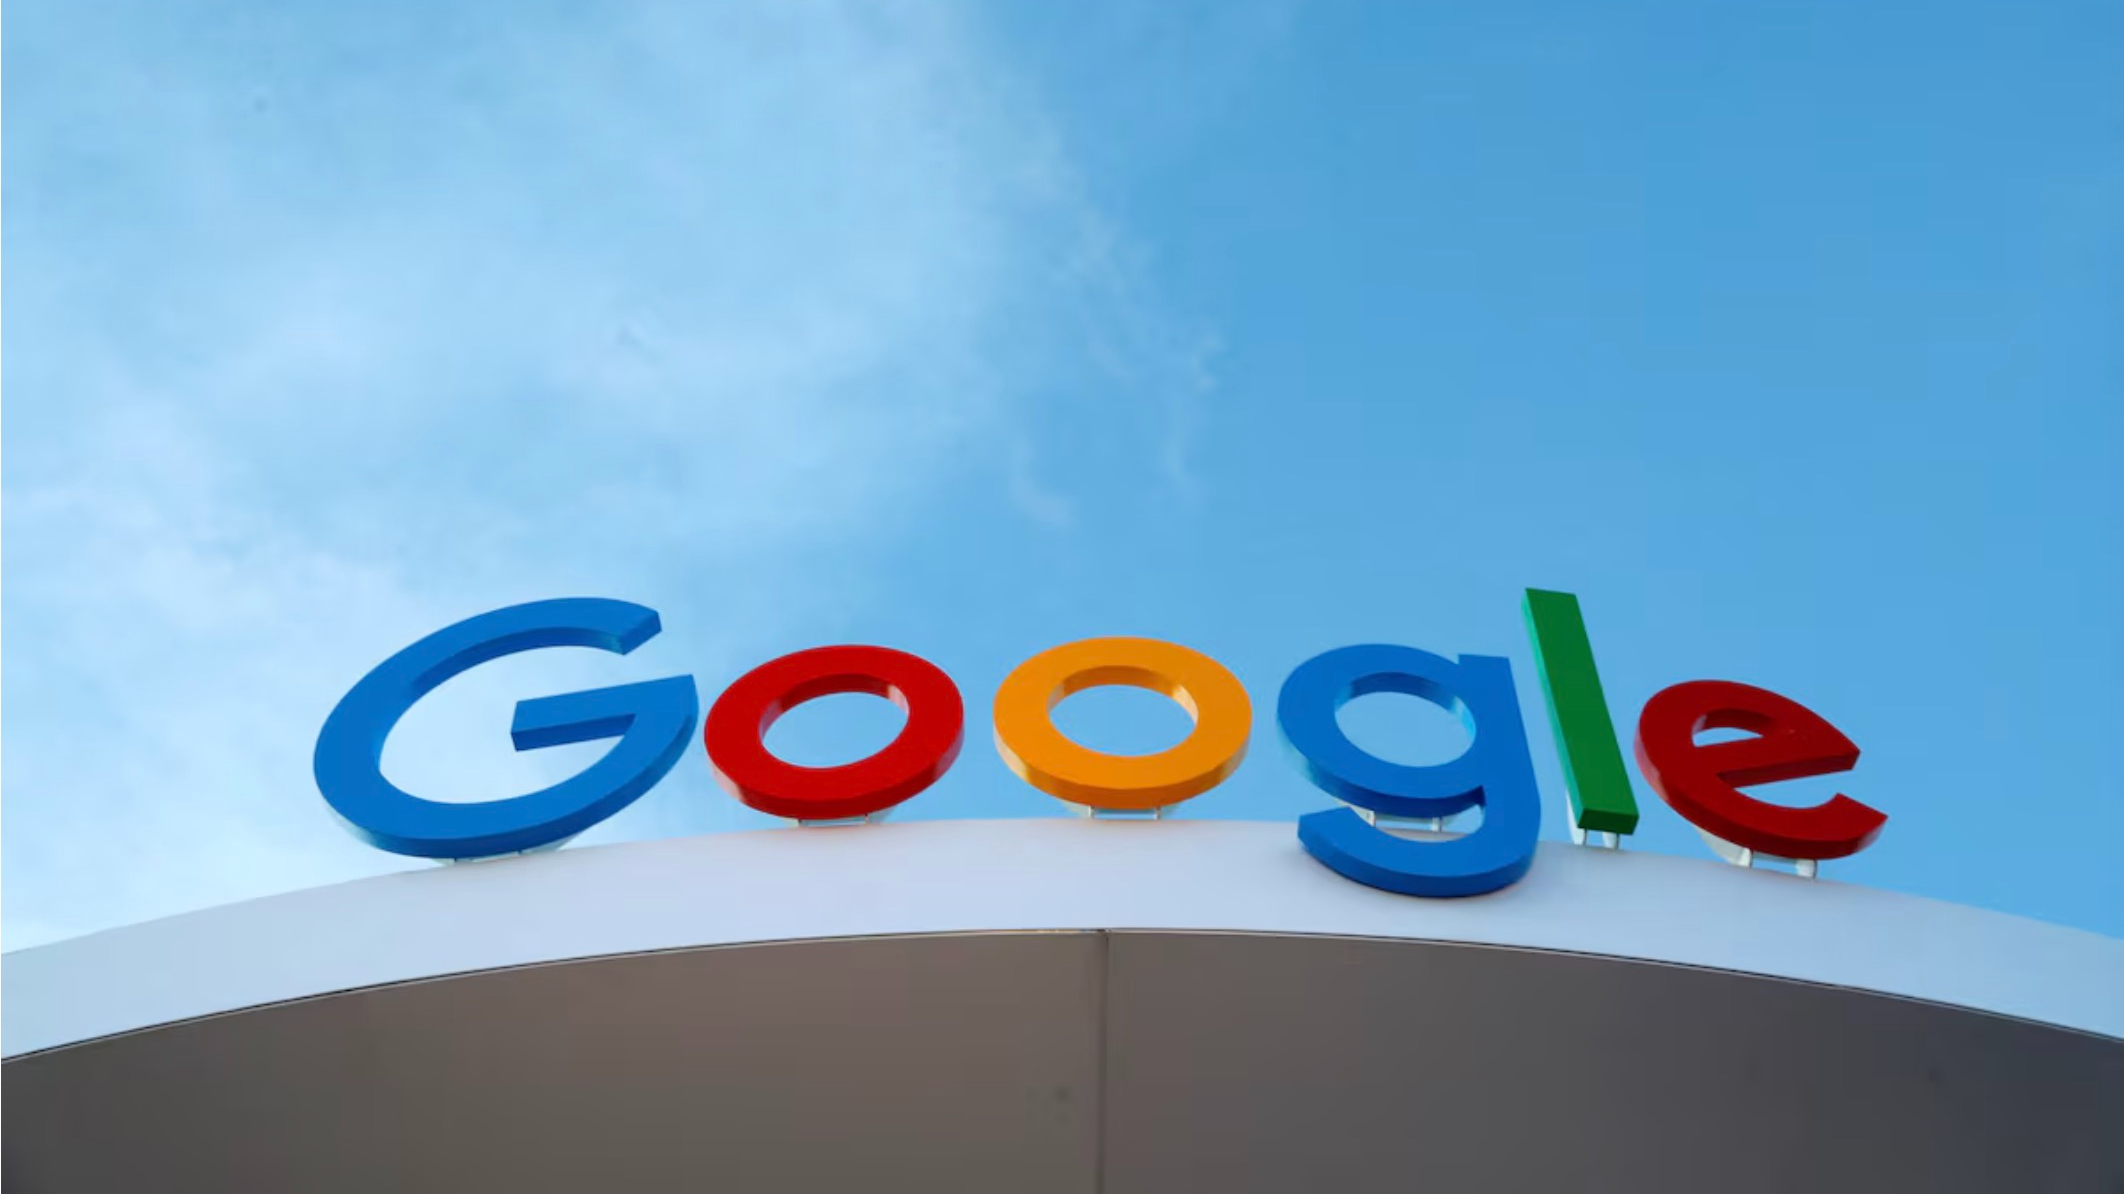 The Google logo is seen on the Google house at CES 2024, an annual consumer electronics trade show, in Las Vegas, Nevada, U.S., January 10, 2024. /Reuters